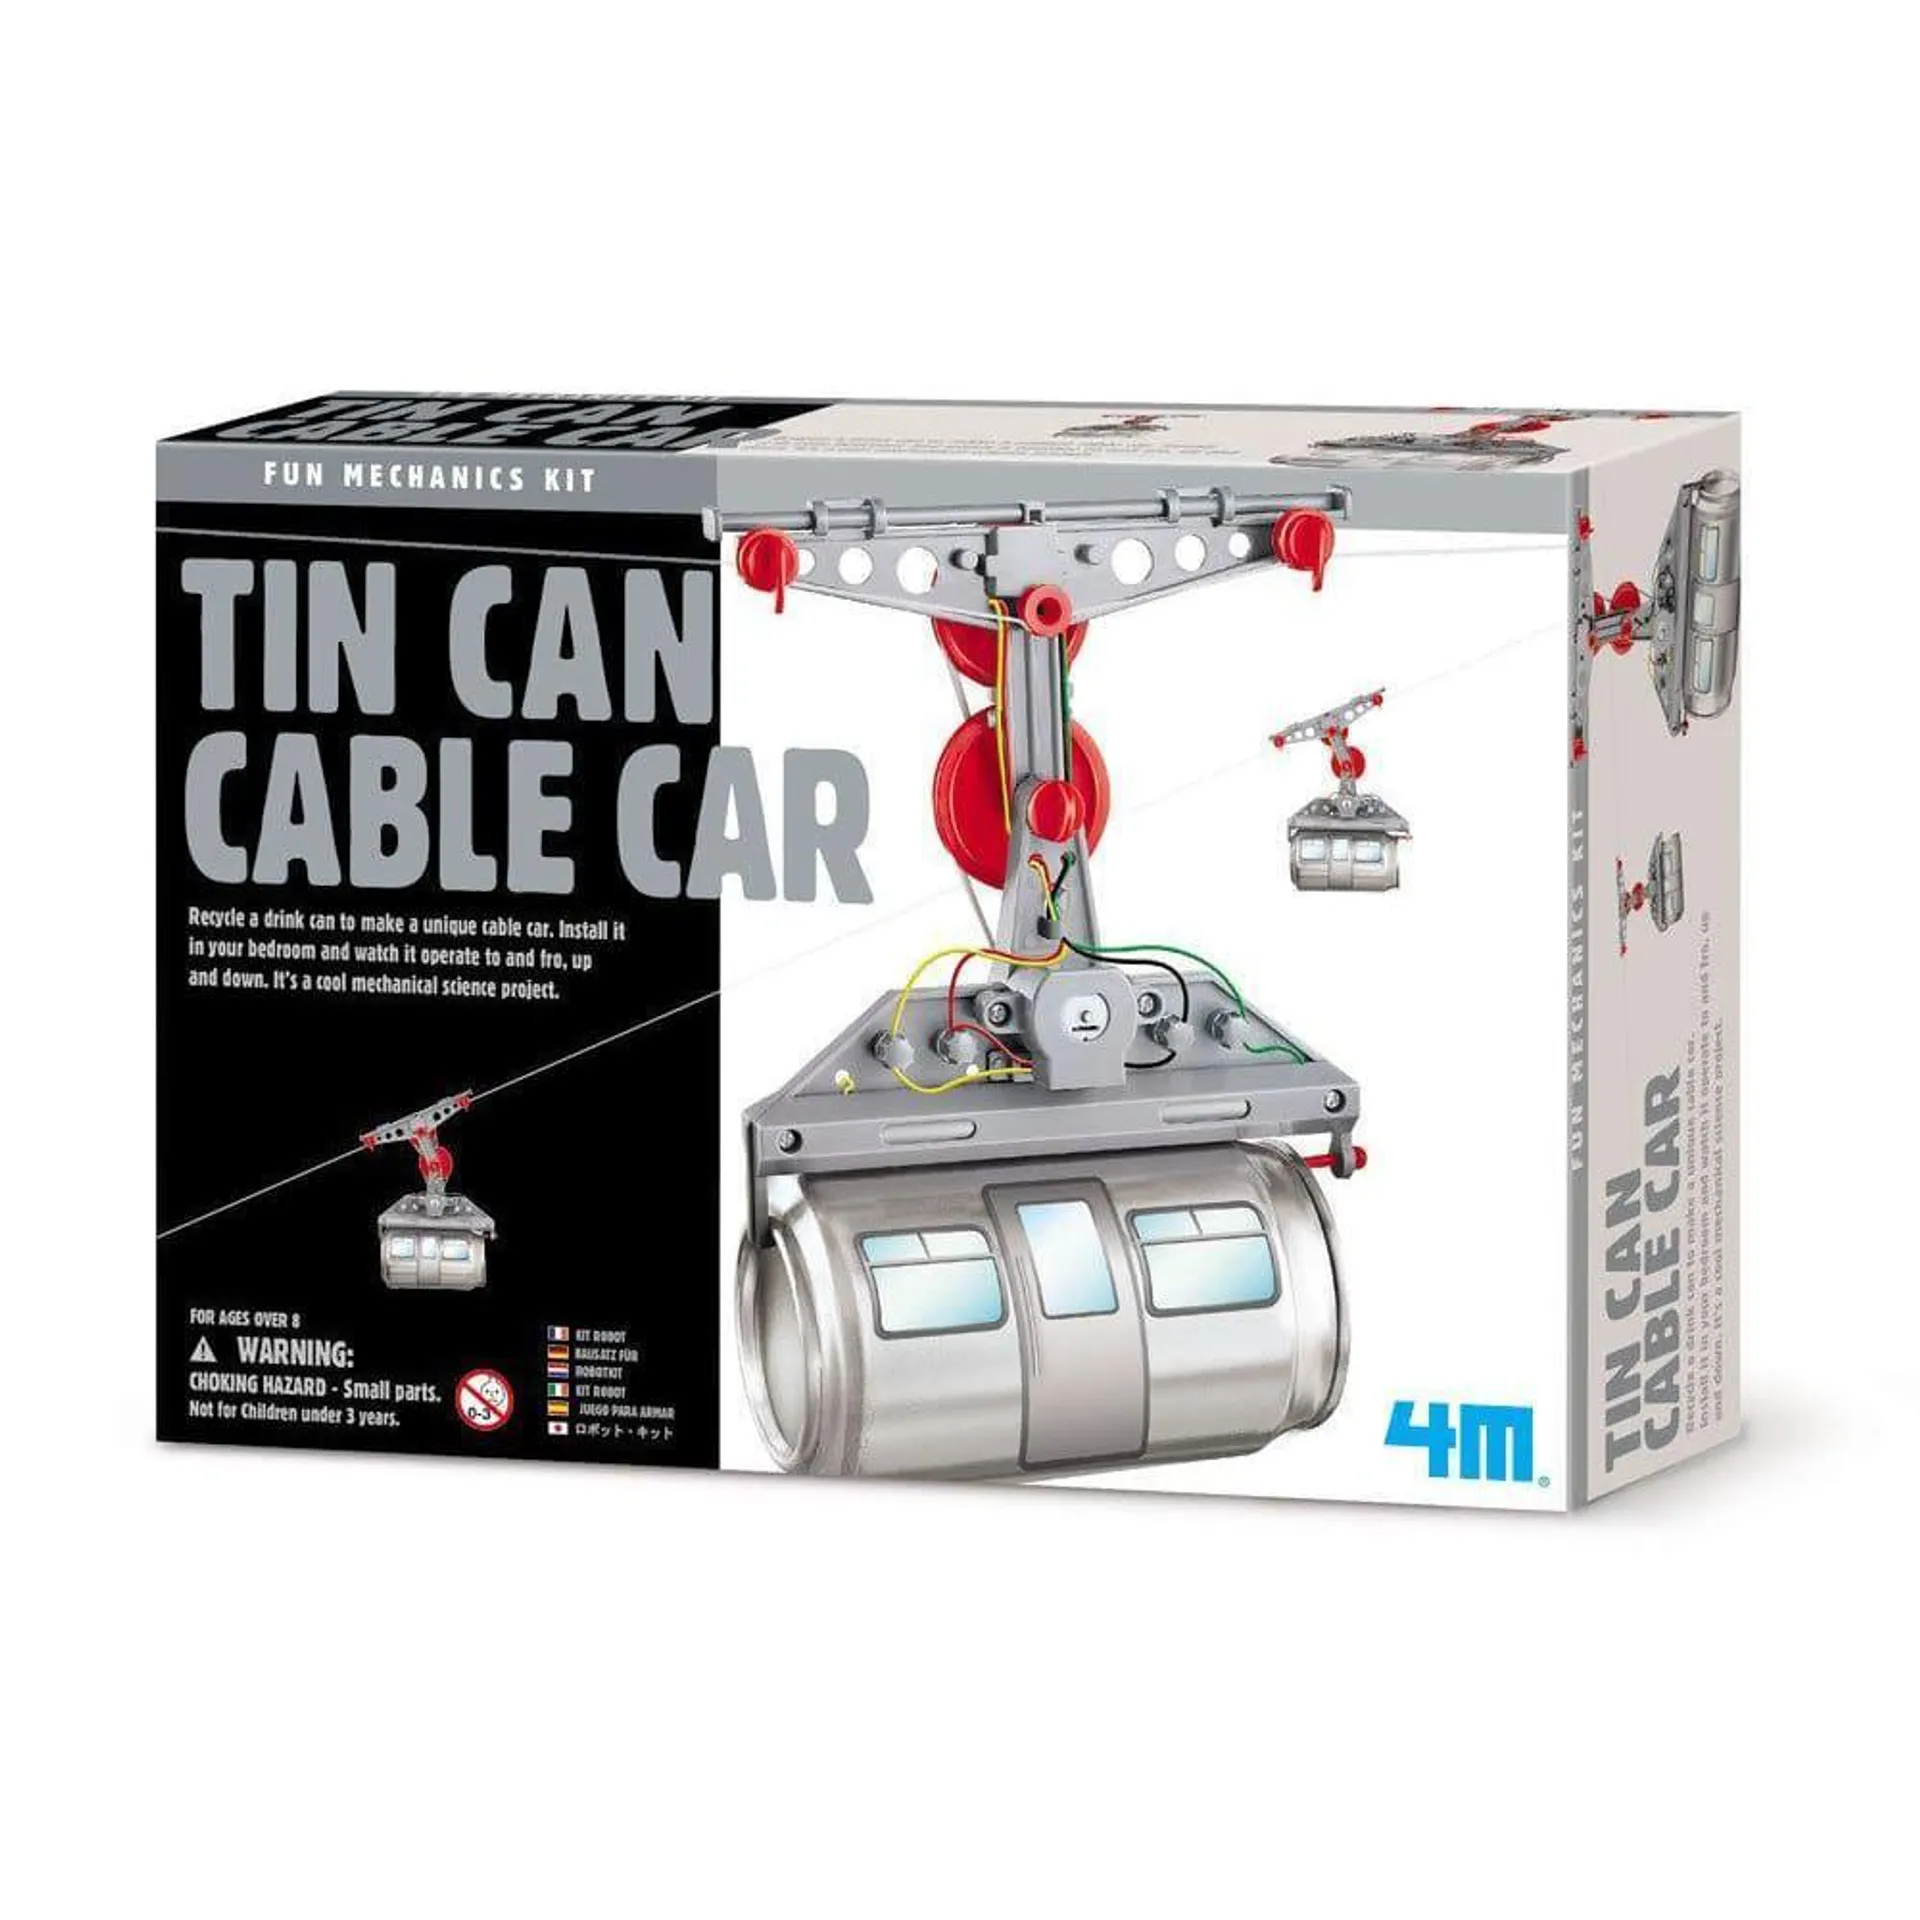 4M Great Gizmo Tin Can Cable Car